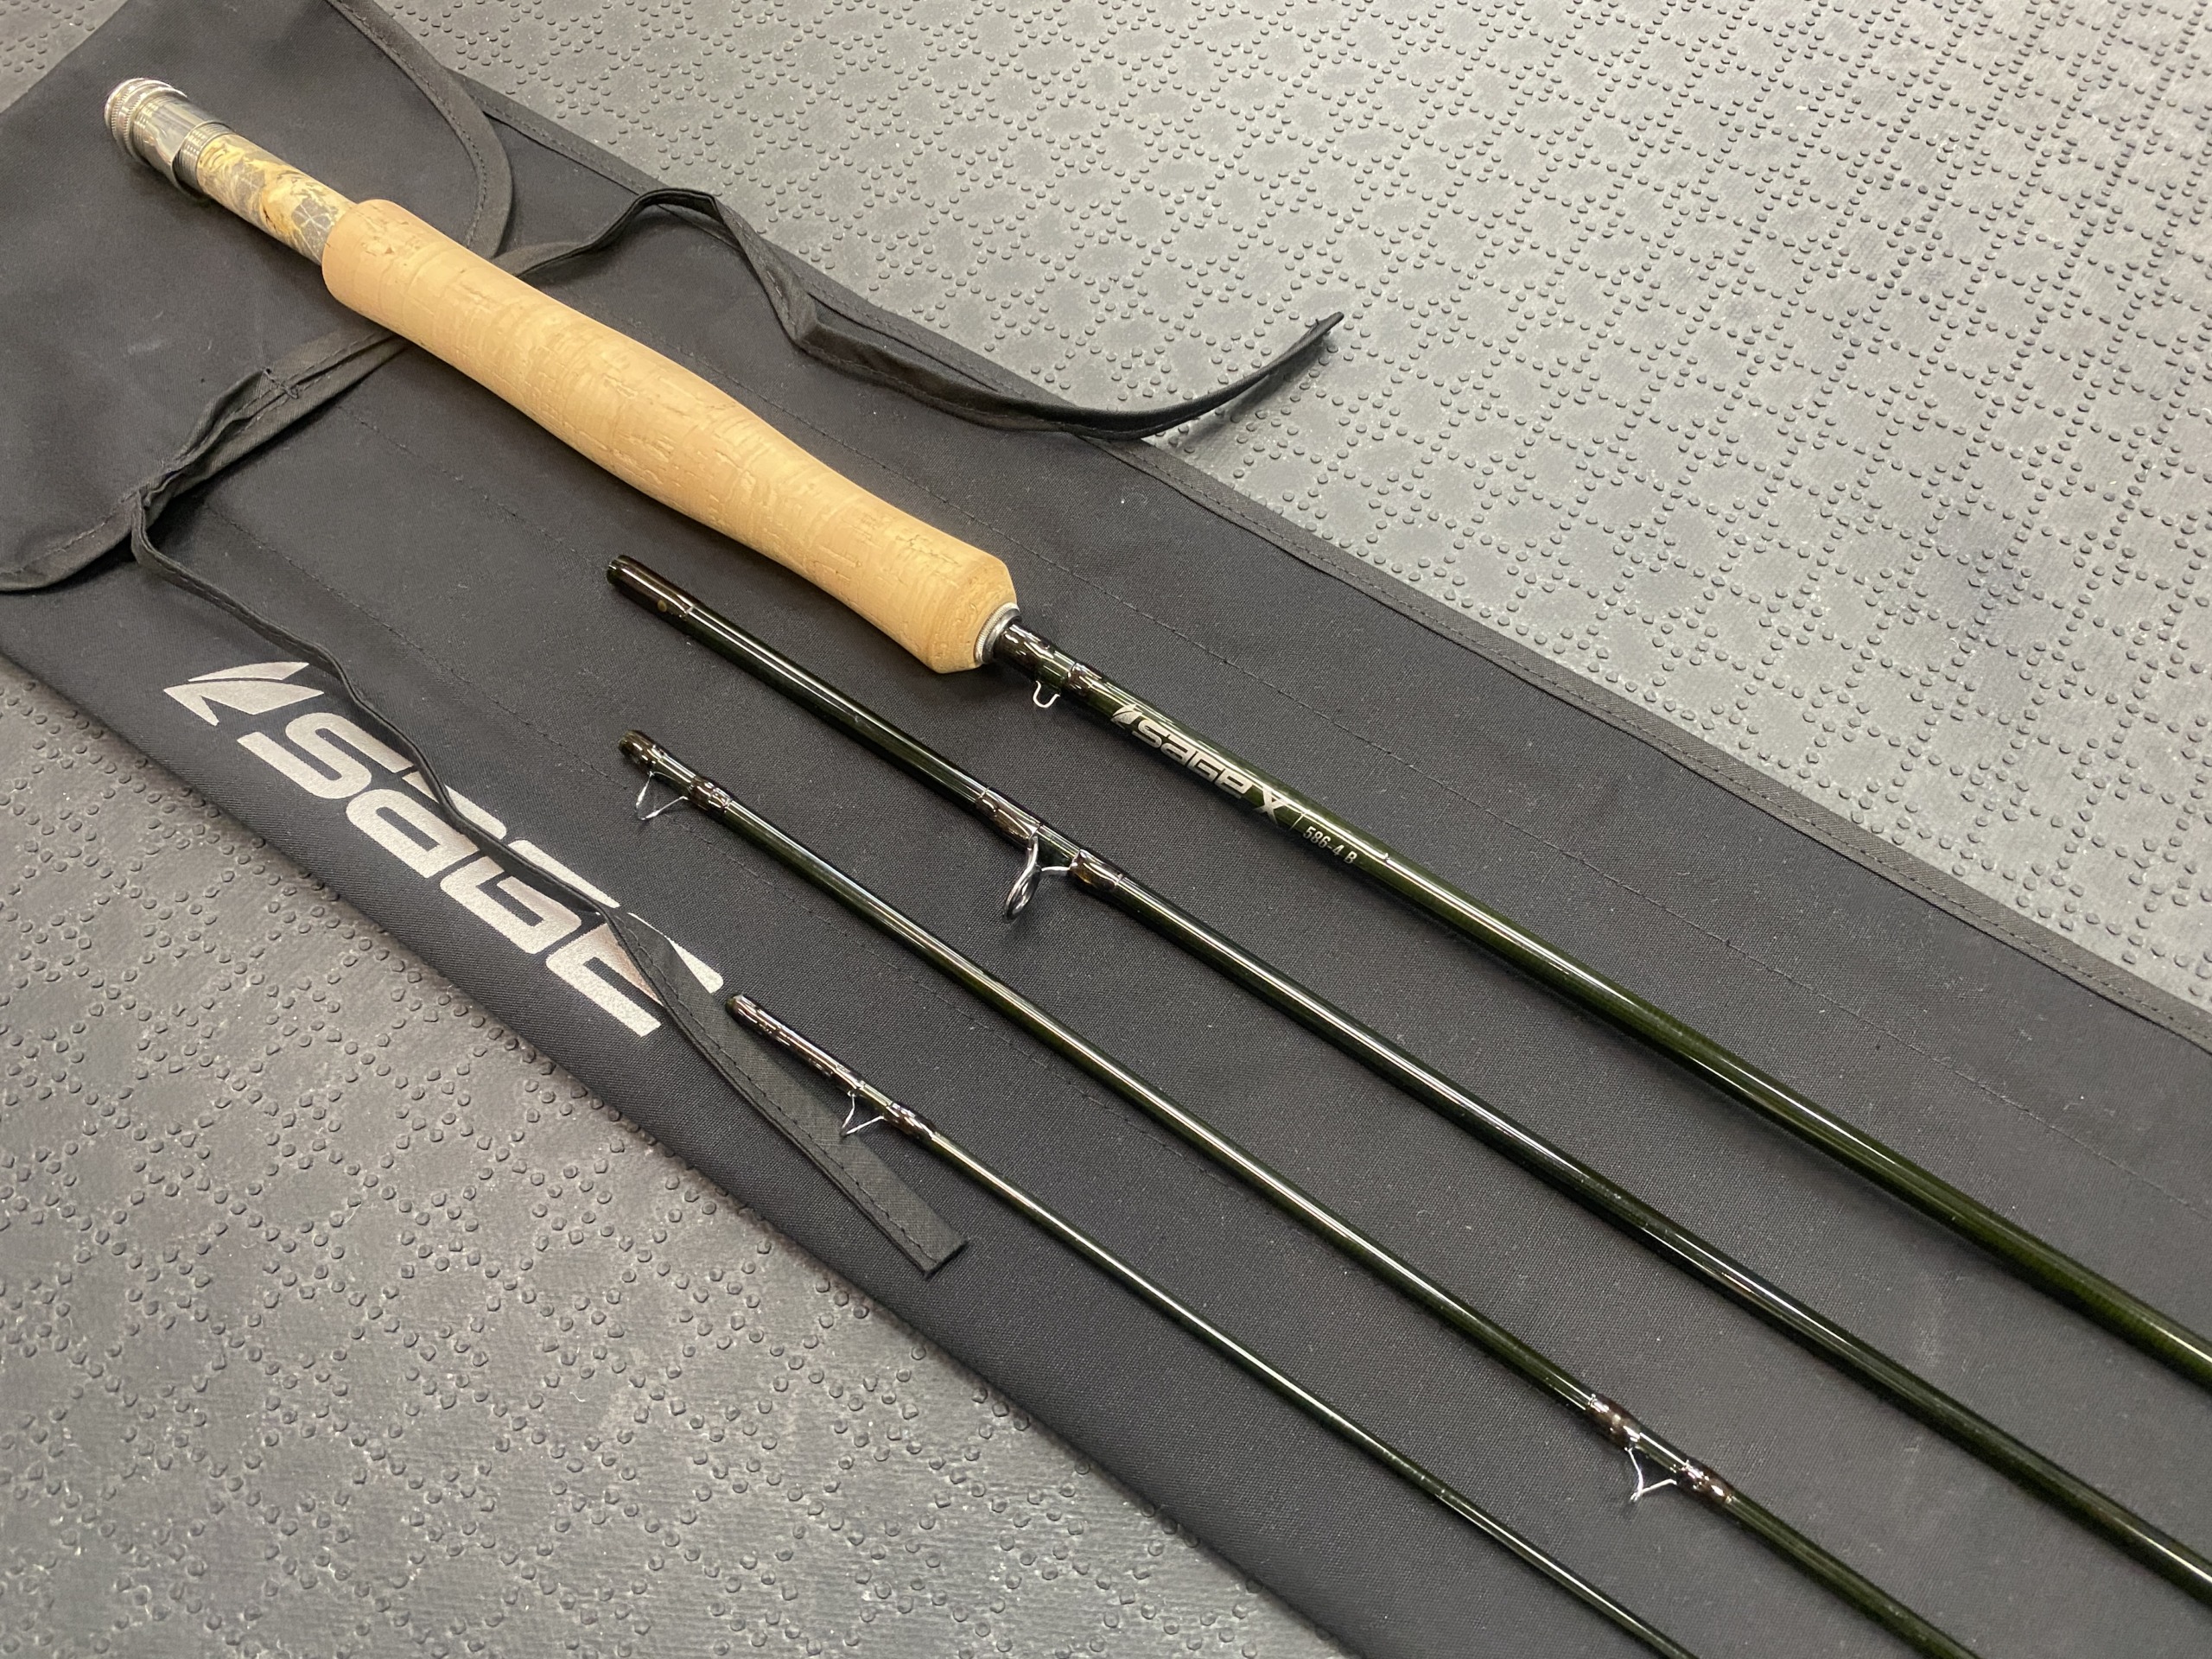 https://thefirstcast.ca/wp-content/uploads/2021/08/Sage-X-586-4B-Custom-Built-5-Weight-8-Foot-6-Inch-4-Piece-Fly-Rod-A-scaled.jpg